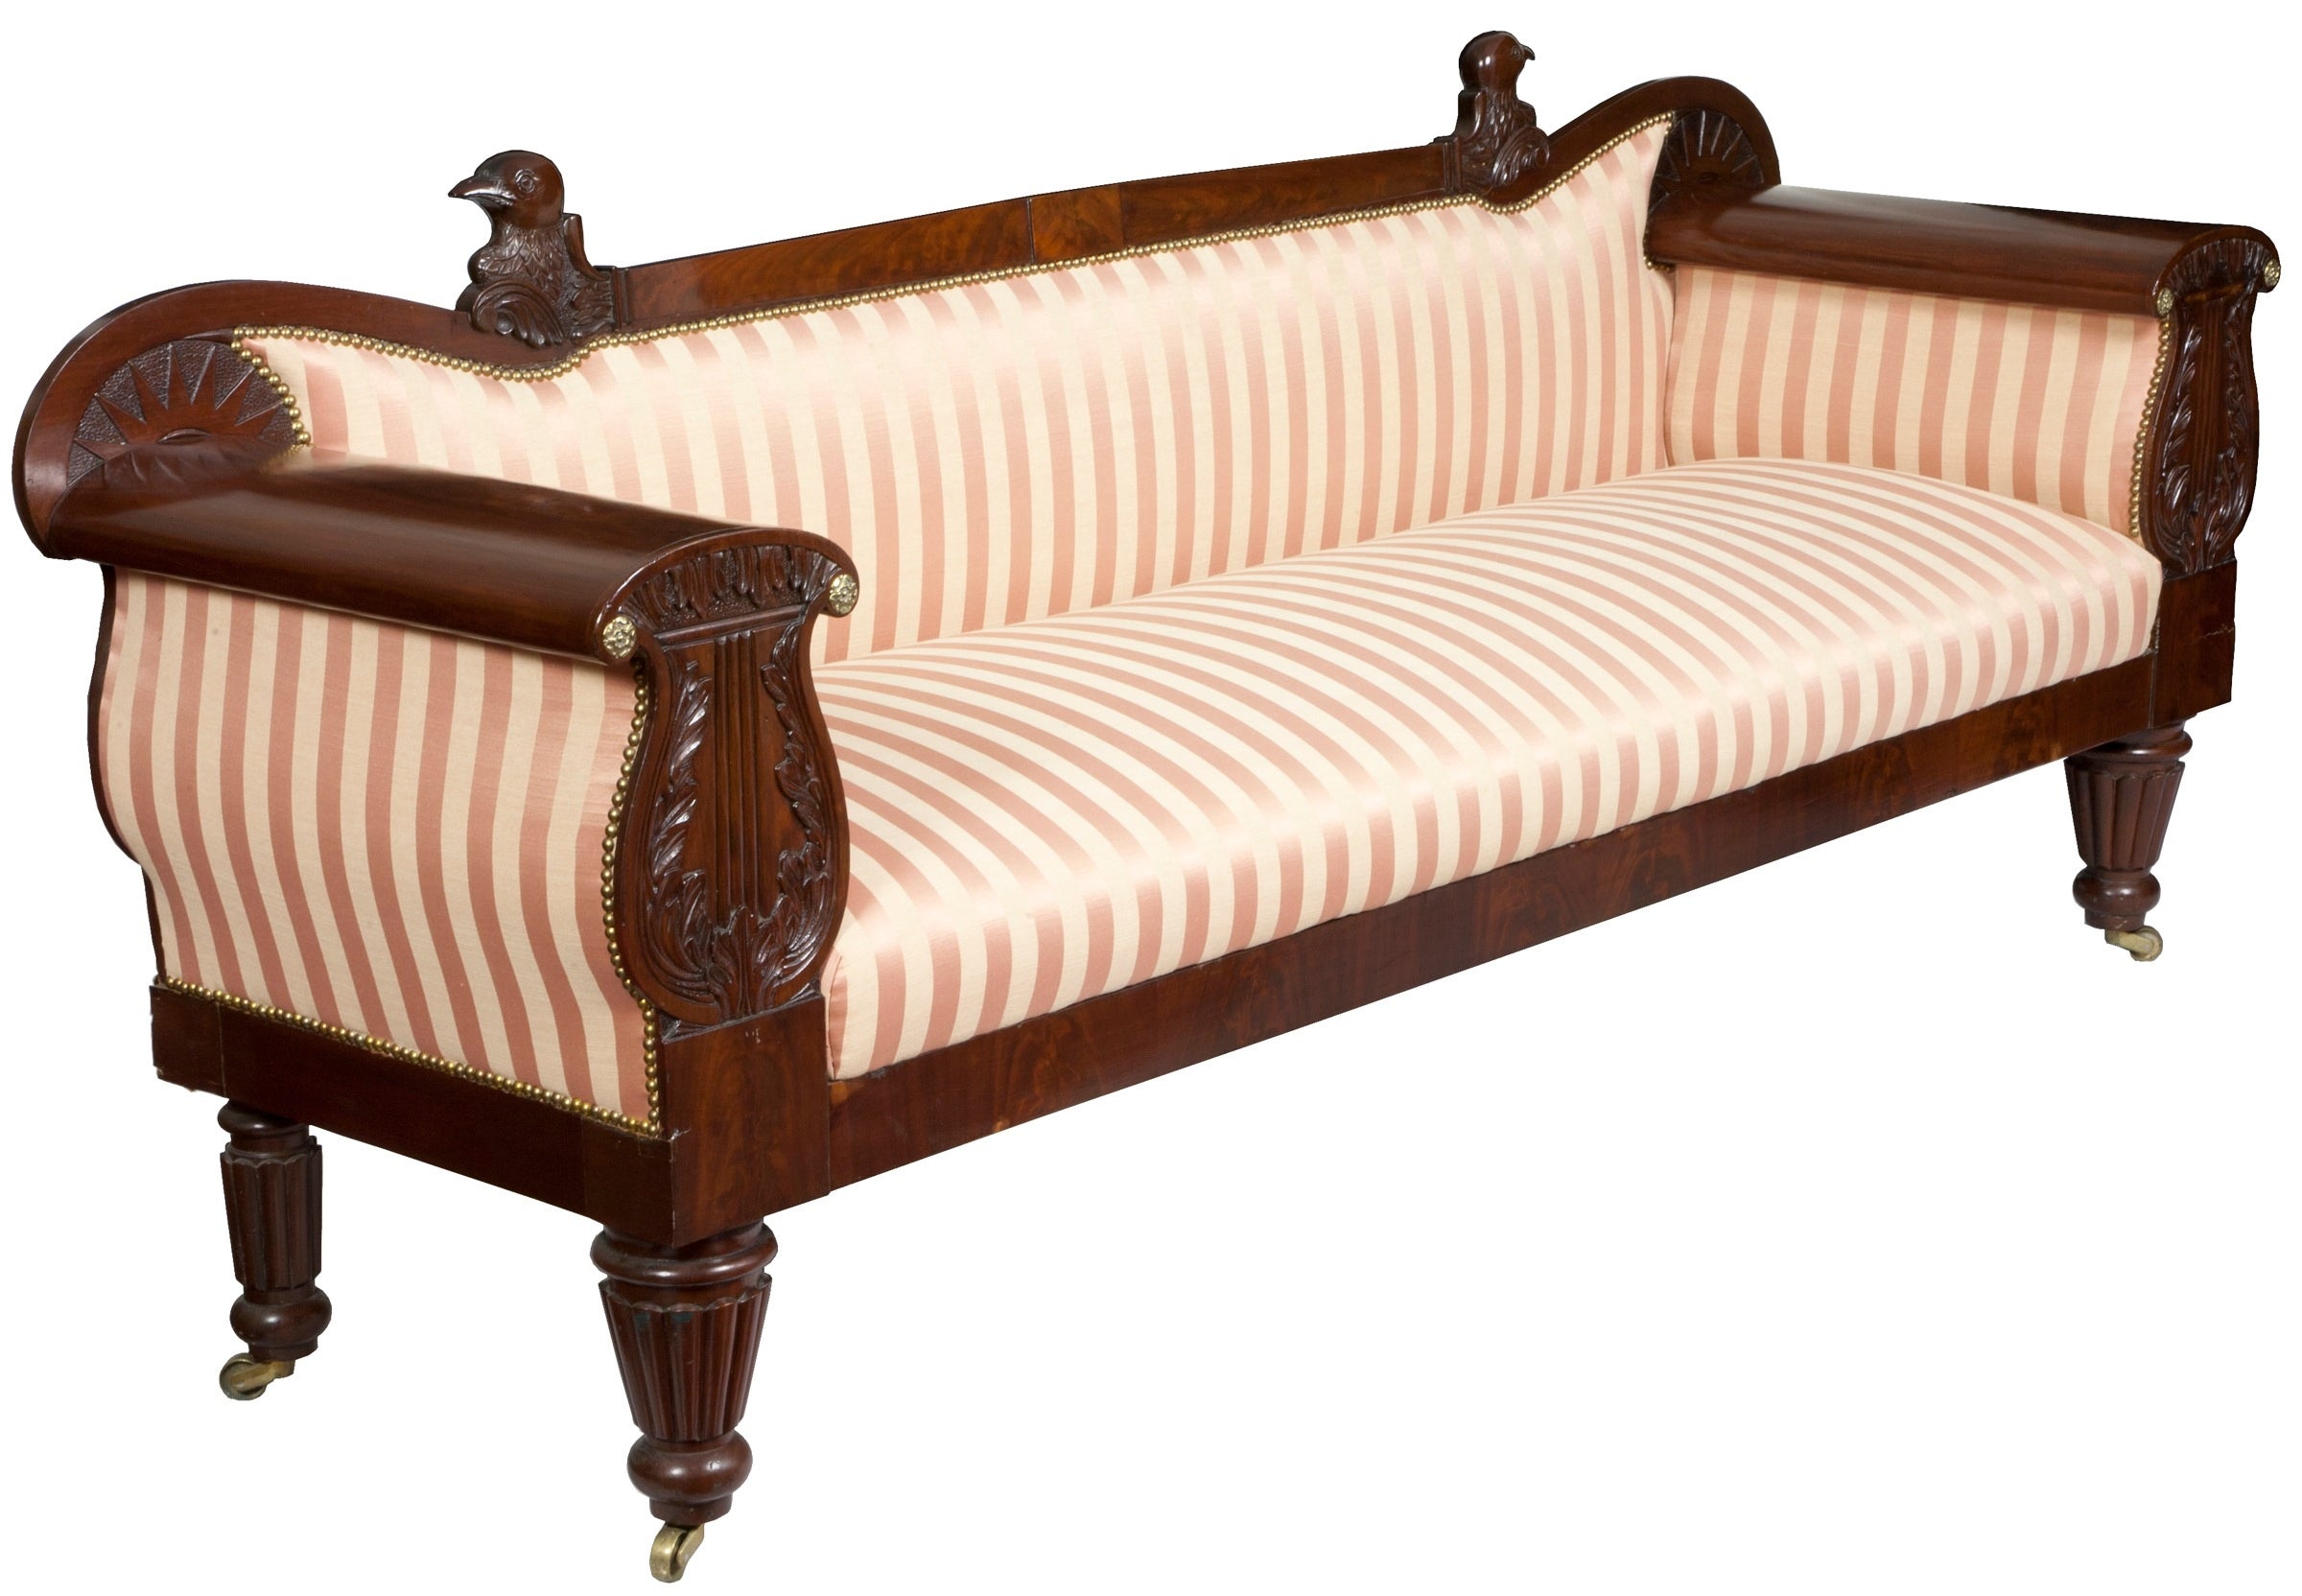 Rare Carved Mahogany Neoclassical Sofa with Eaglets and Lyres, circa 1830